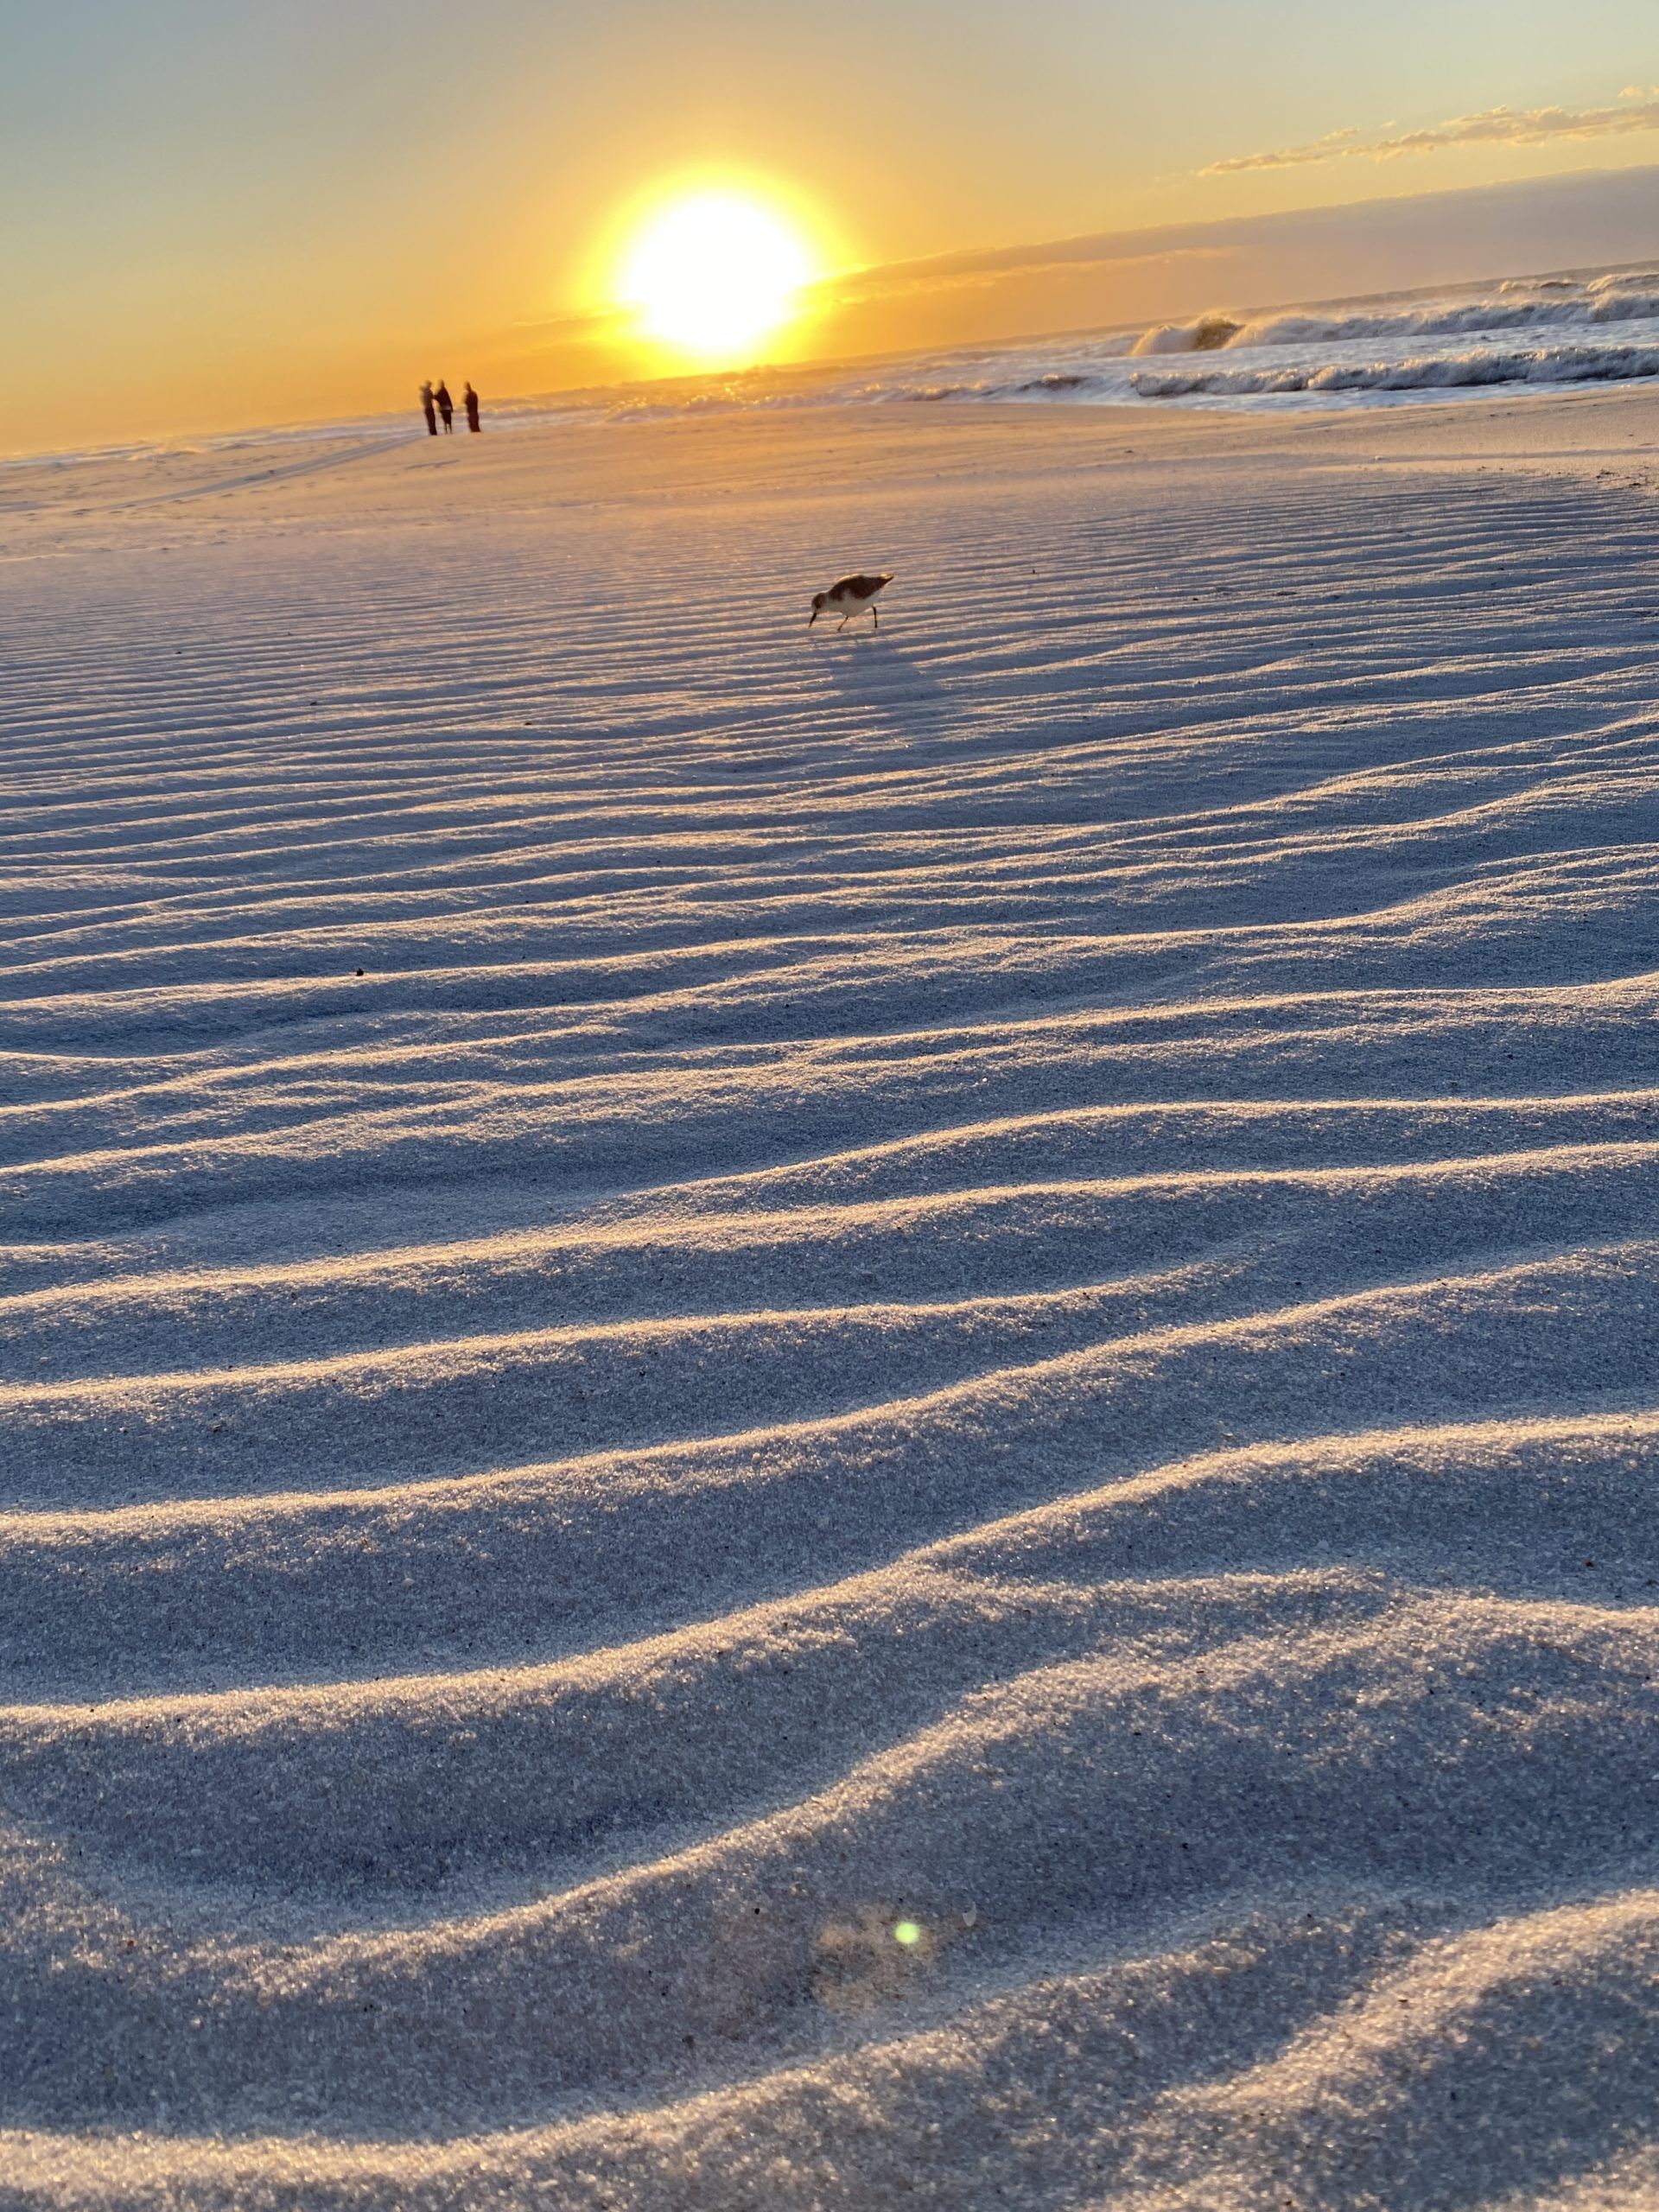 Today's Photo of the Day comes from Deanna Heikkinen. Deanna took this photo at sunrise while walking on Navarre Beach.

"The wind made a gorgeous pattern in the sand," Deanna said.